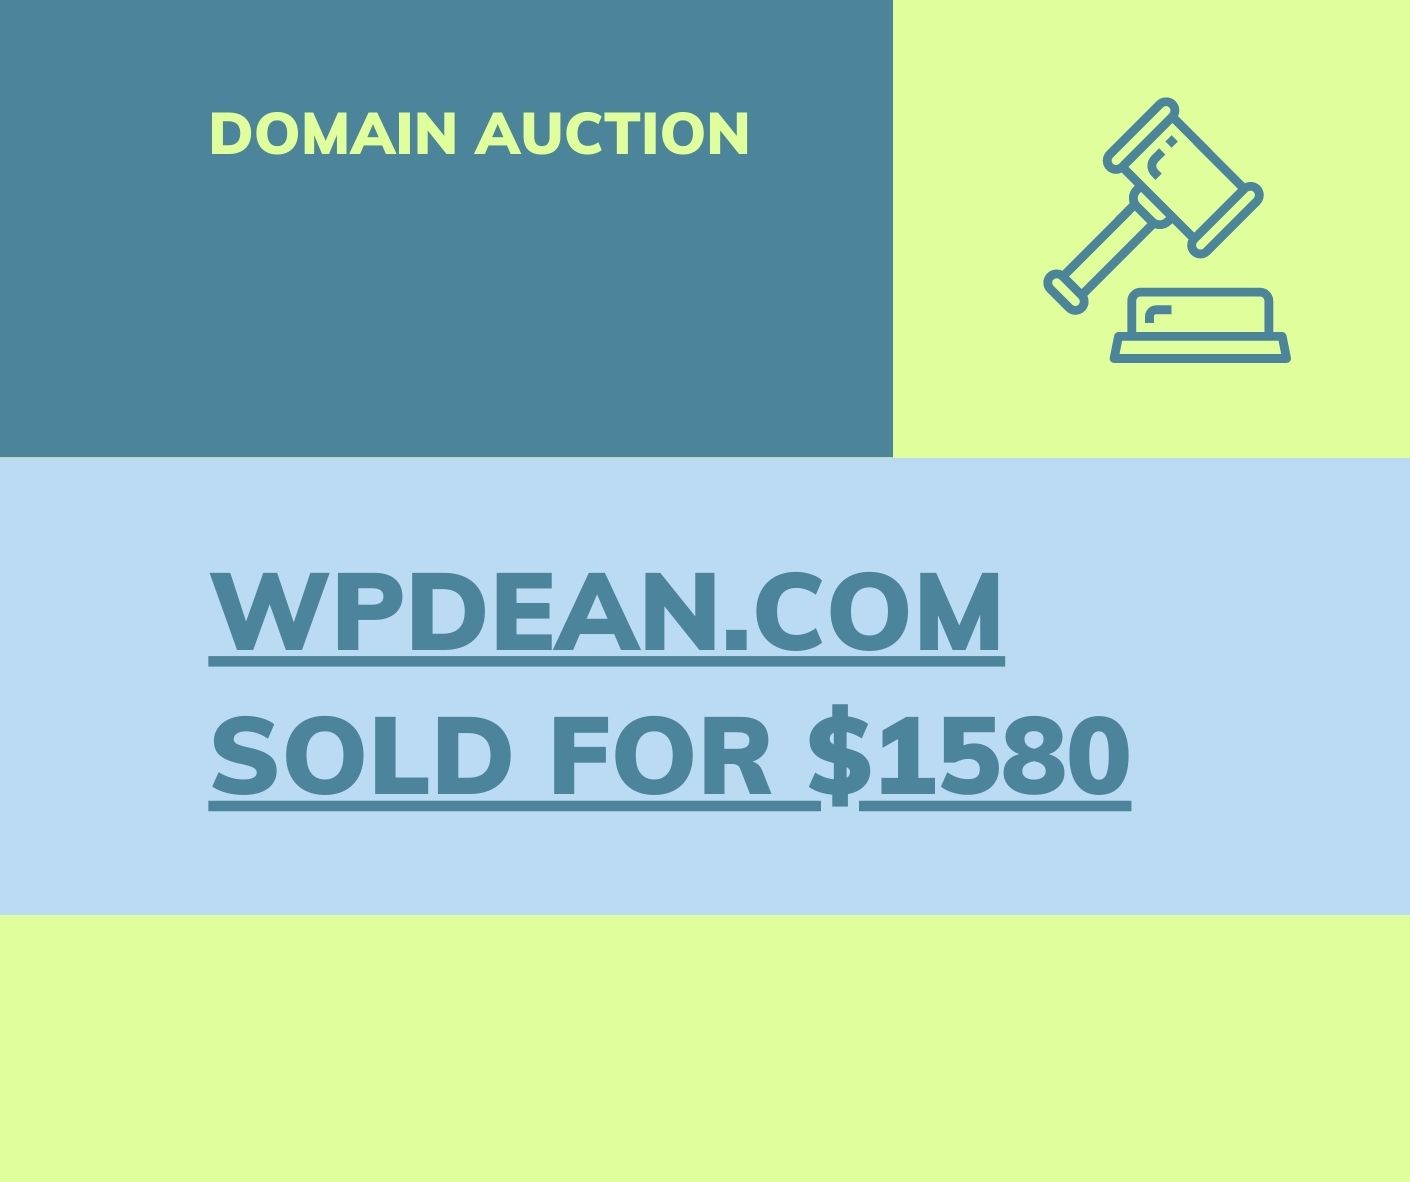 WPDean.com Sold at GoDaddy auction for $1580